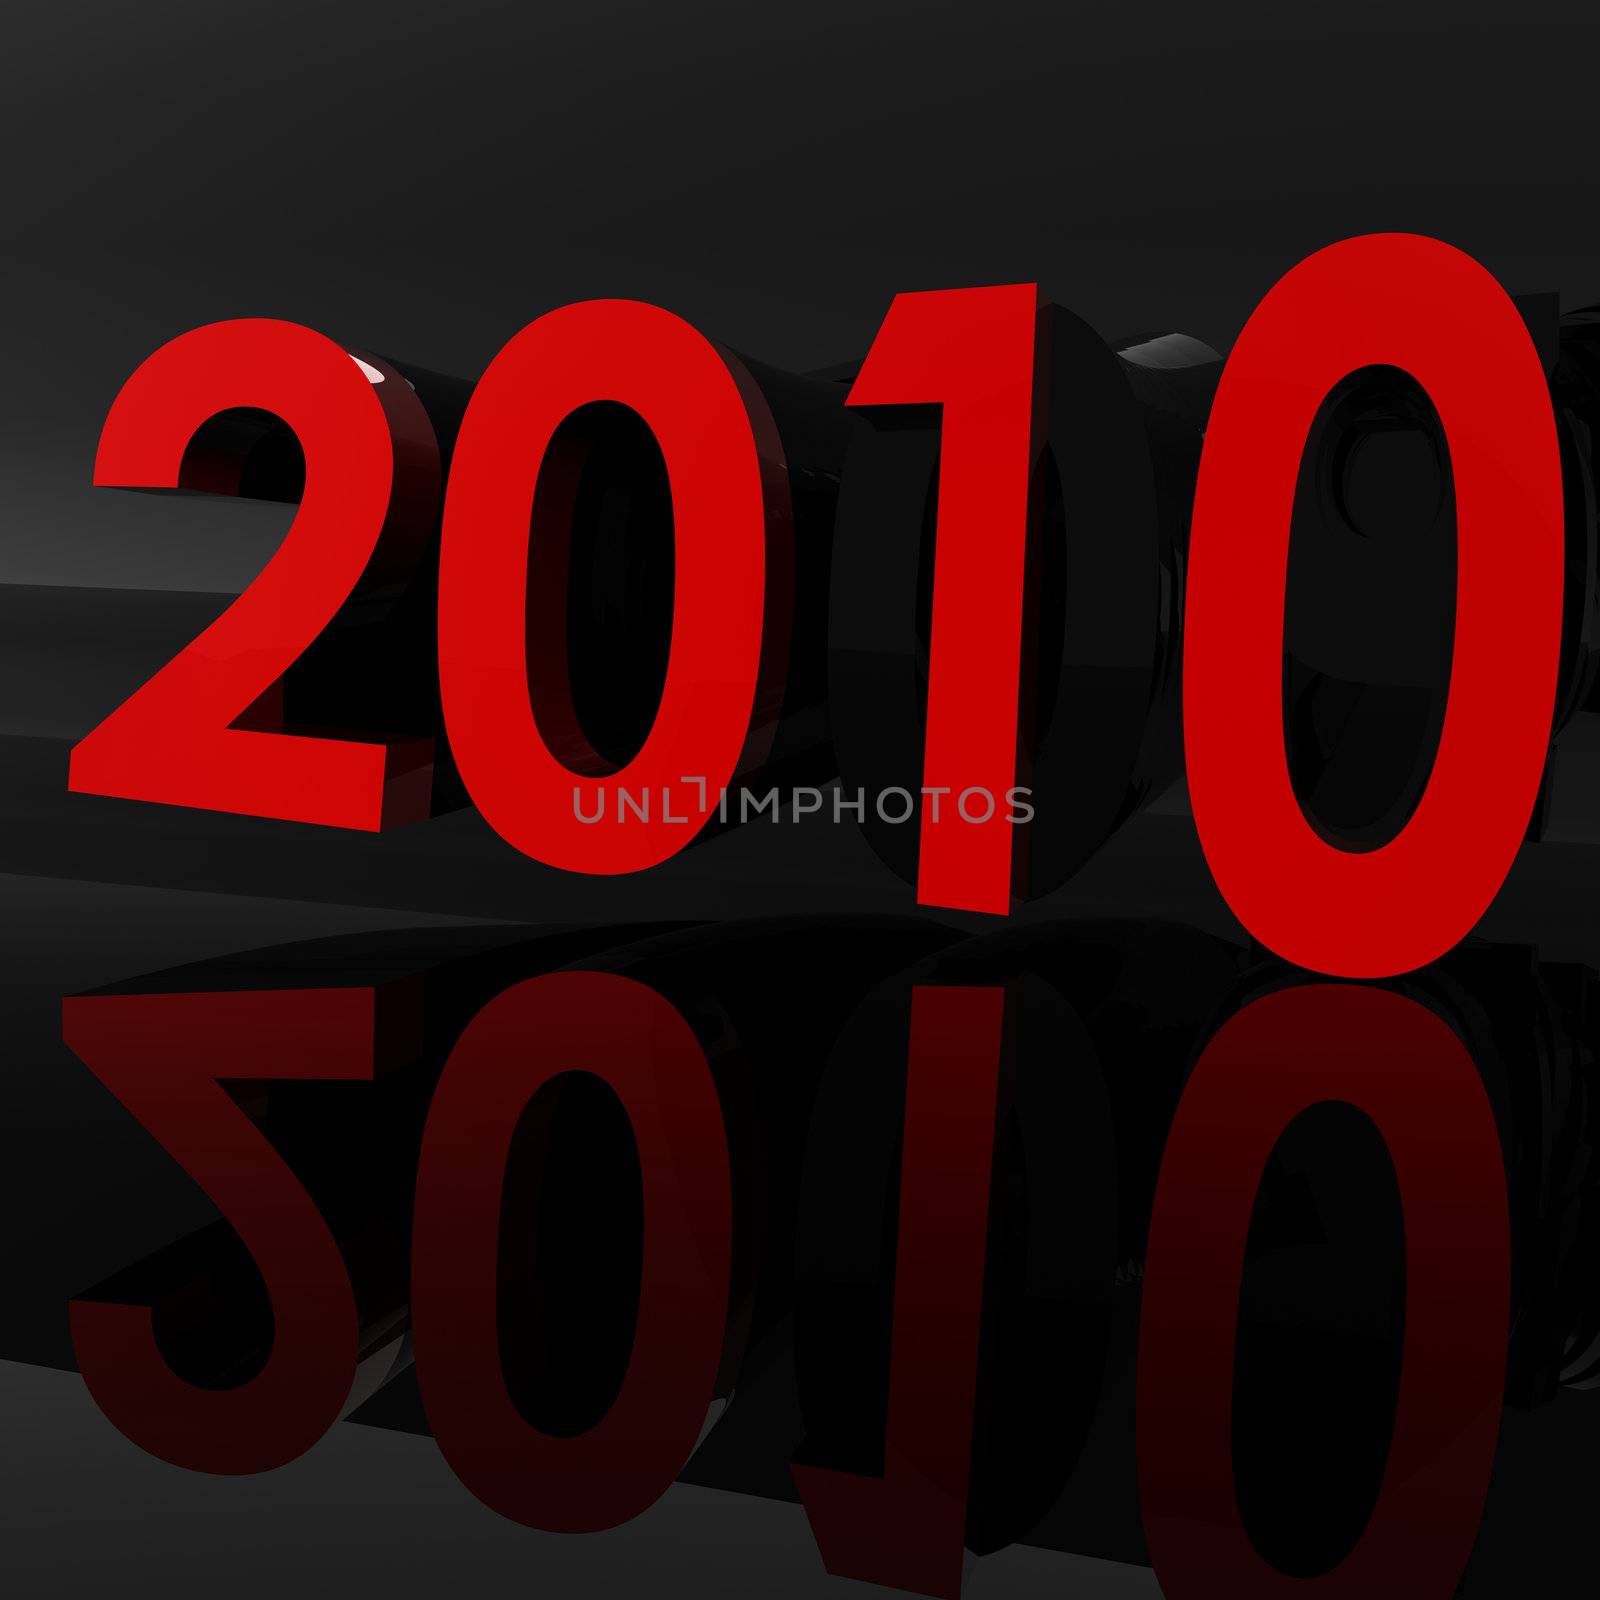 3d image of 2010, red and black design